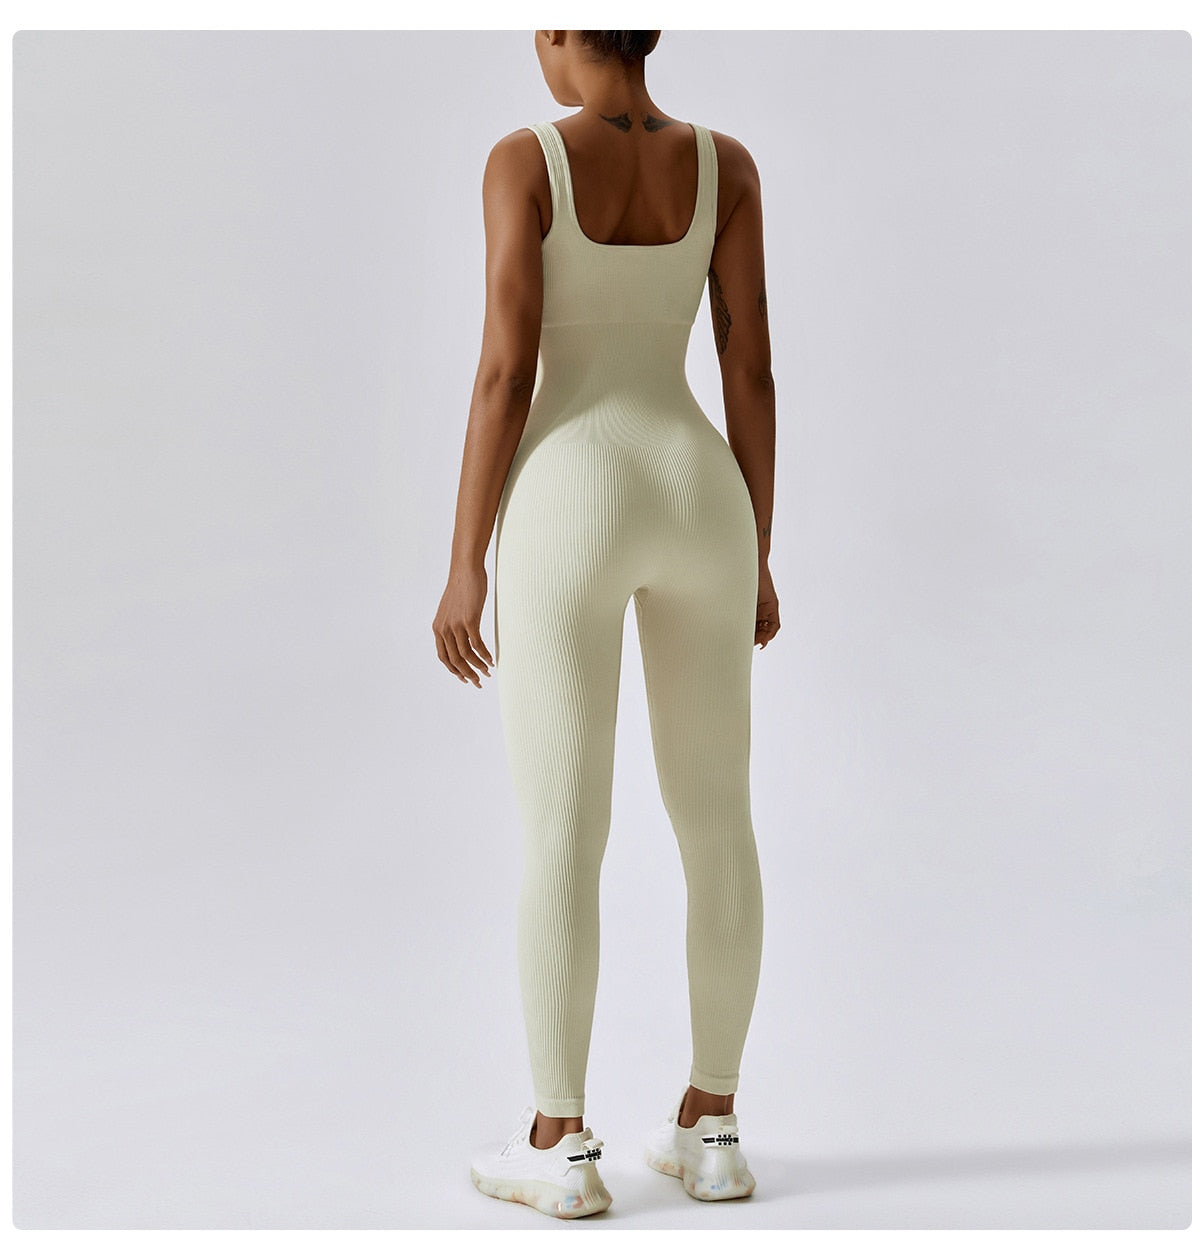  QINSEN Seamless Sleeveless Onesie Yoga Workout Gym Leggings  Tank Top Jumpsuit for Women Beige S : Clothing, Shoes & Jewelry